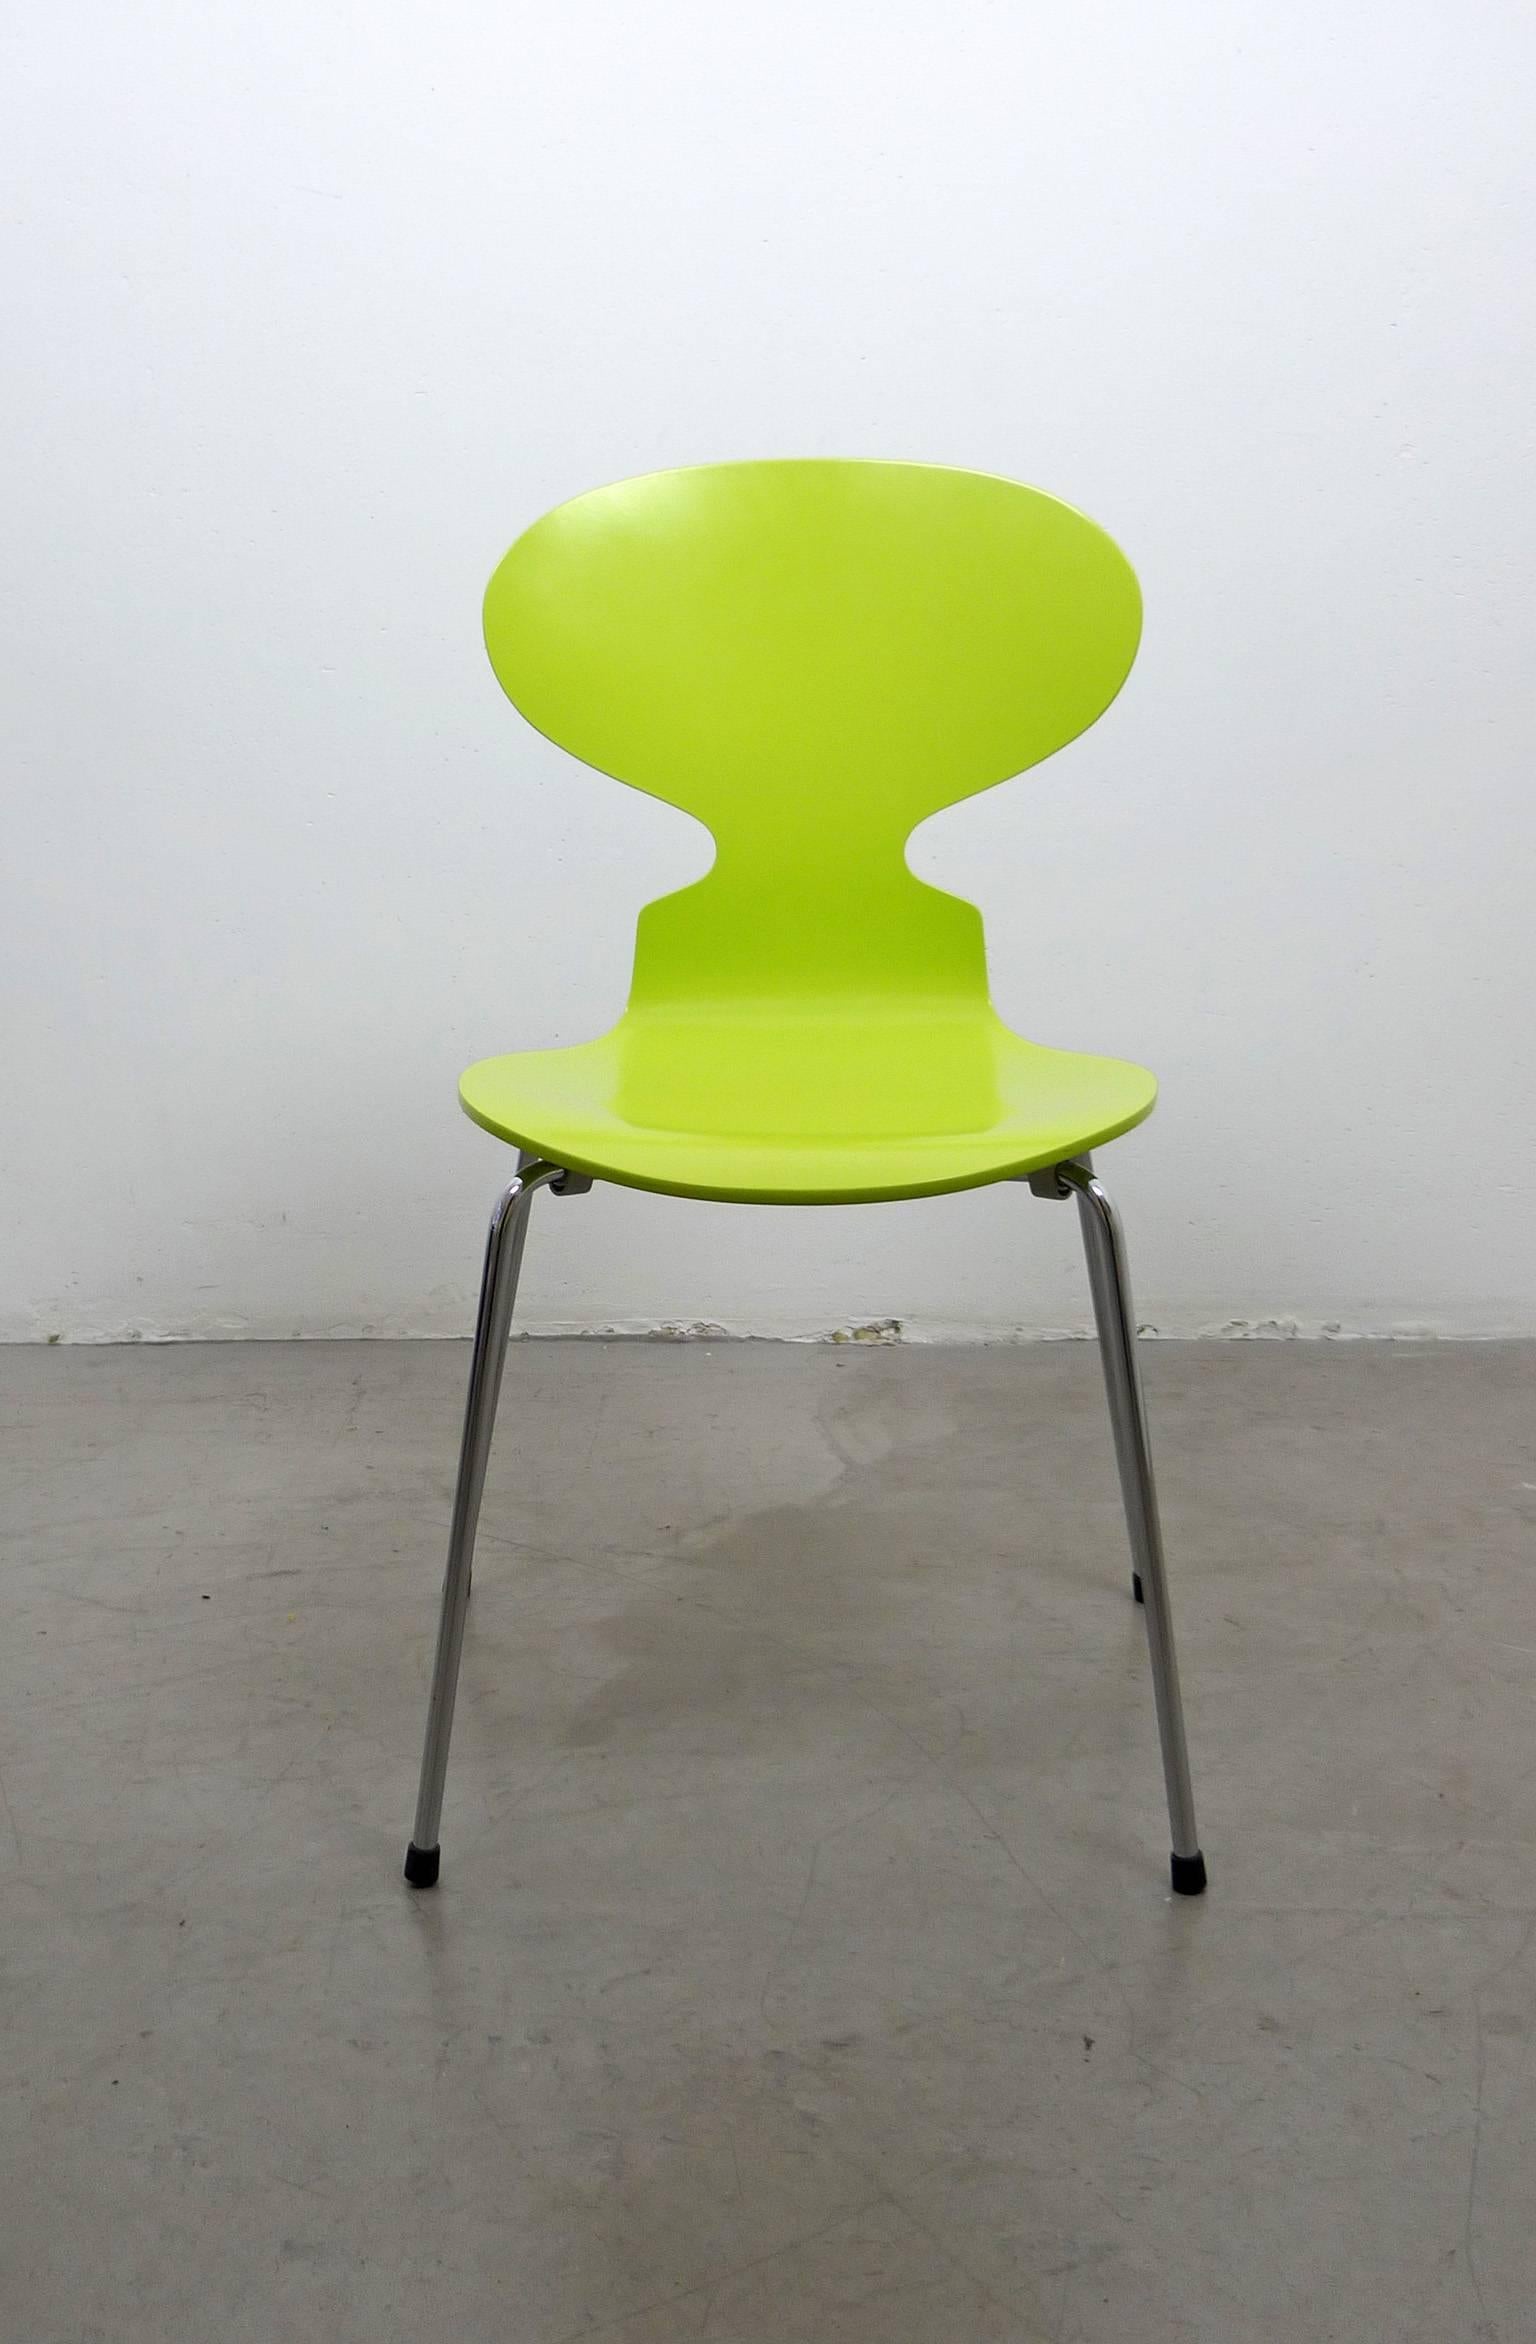 The ant chair model 3101 was designed by Arne Jacobsen in 1952 and produced by the Danish furniture manufacturer Fritz Hansen. It features a chromed stacking structure and a lacquered seat in laminated wood. The color is Vernal Green, number 56. The